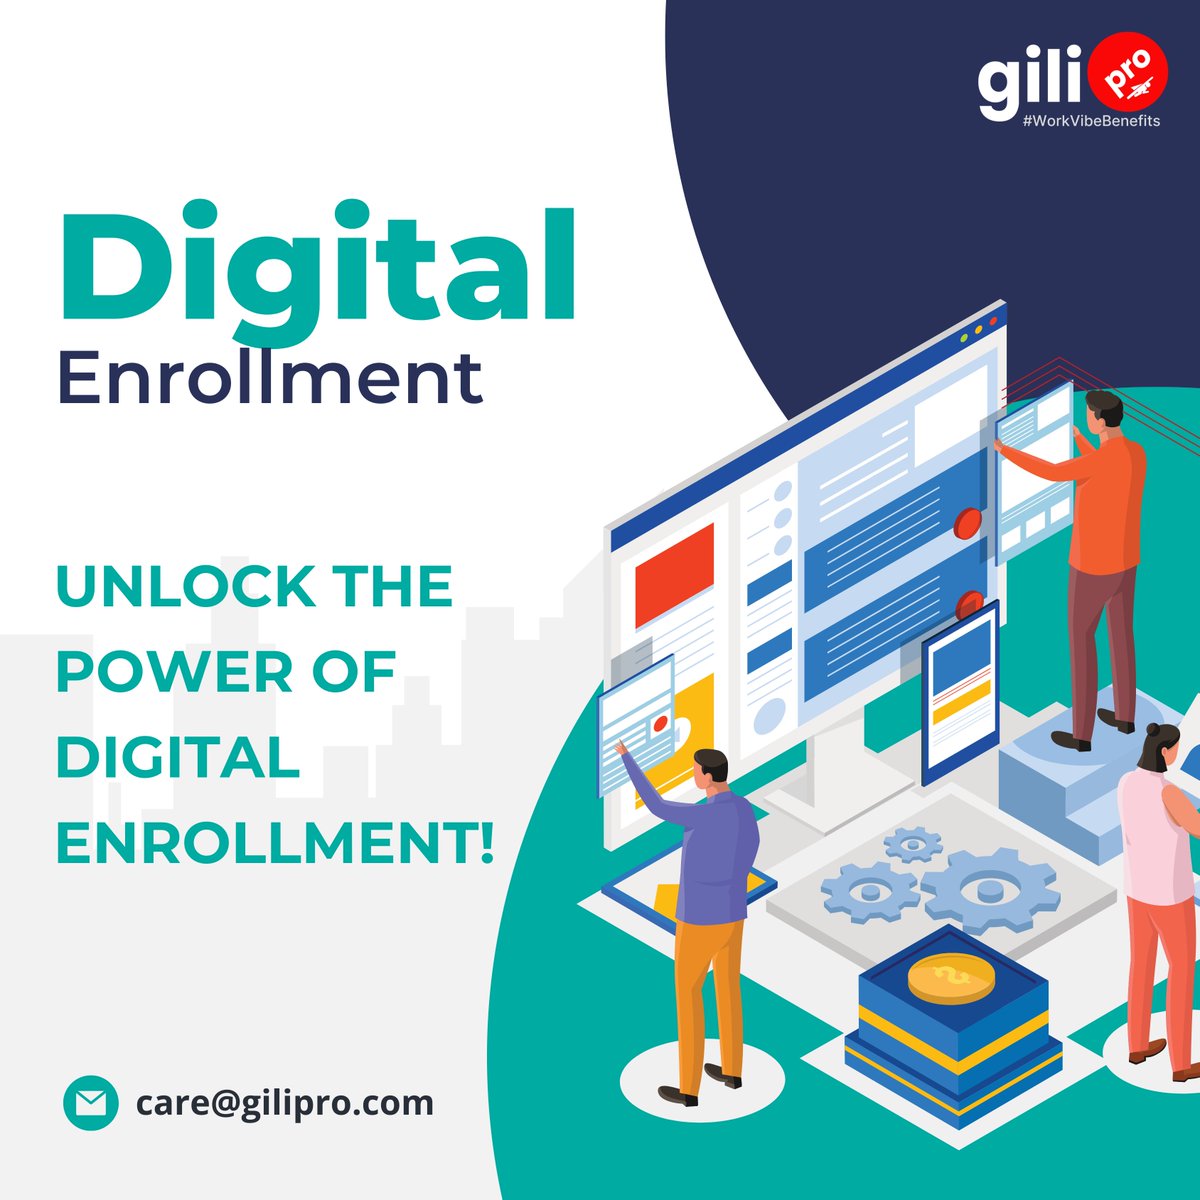 Don't let paperwork hold you back! Switch to #digitalenrollment for #Grouphealthinsurance. It's simple, fast, and stress-free.

#gilipro #digital #healthinsurance #insurance #insurancepolicy #workvibebenefits #grouphealthinsurance #employeebenefits #healthcare #wellness